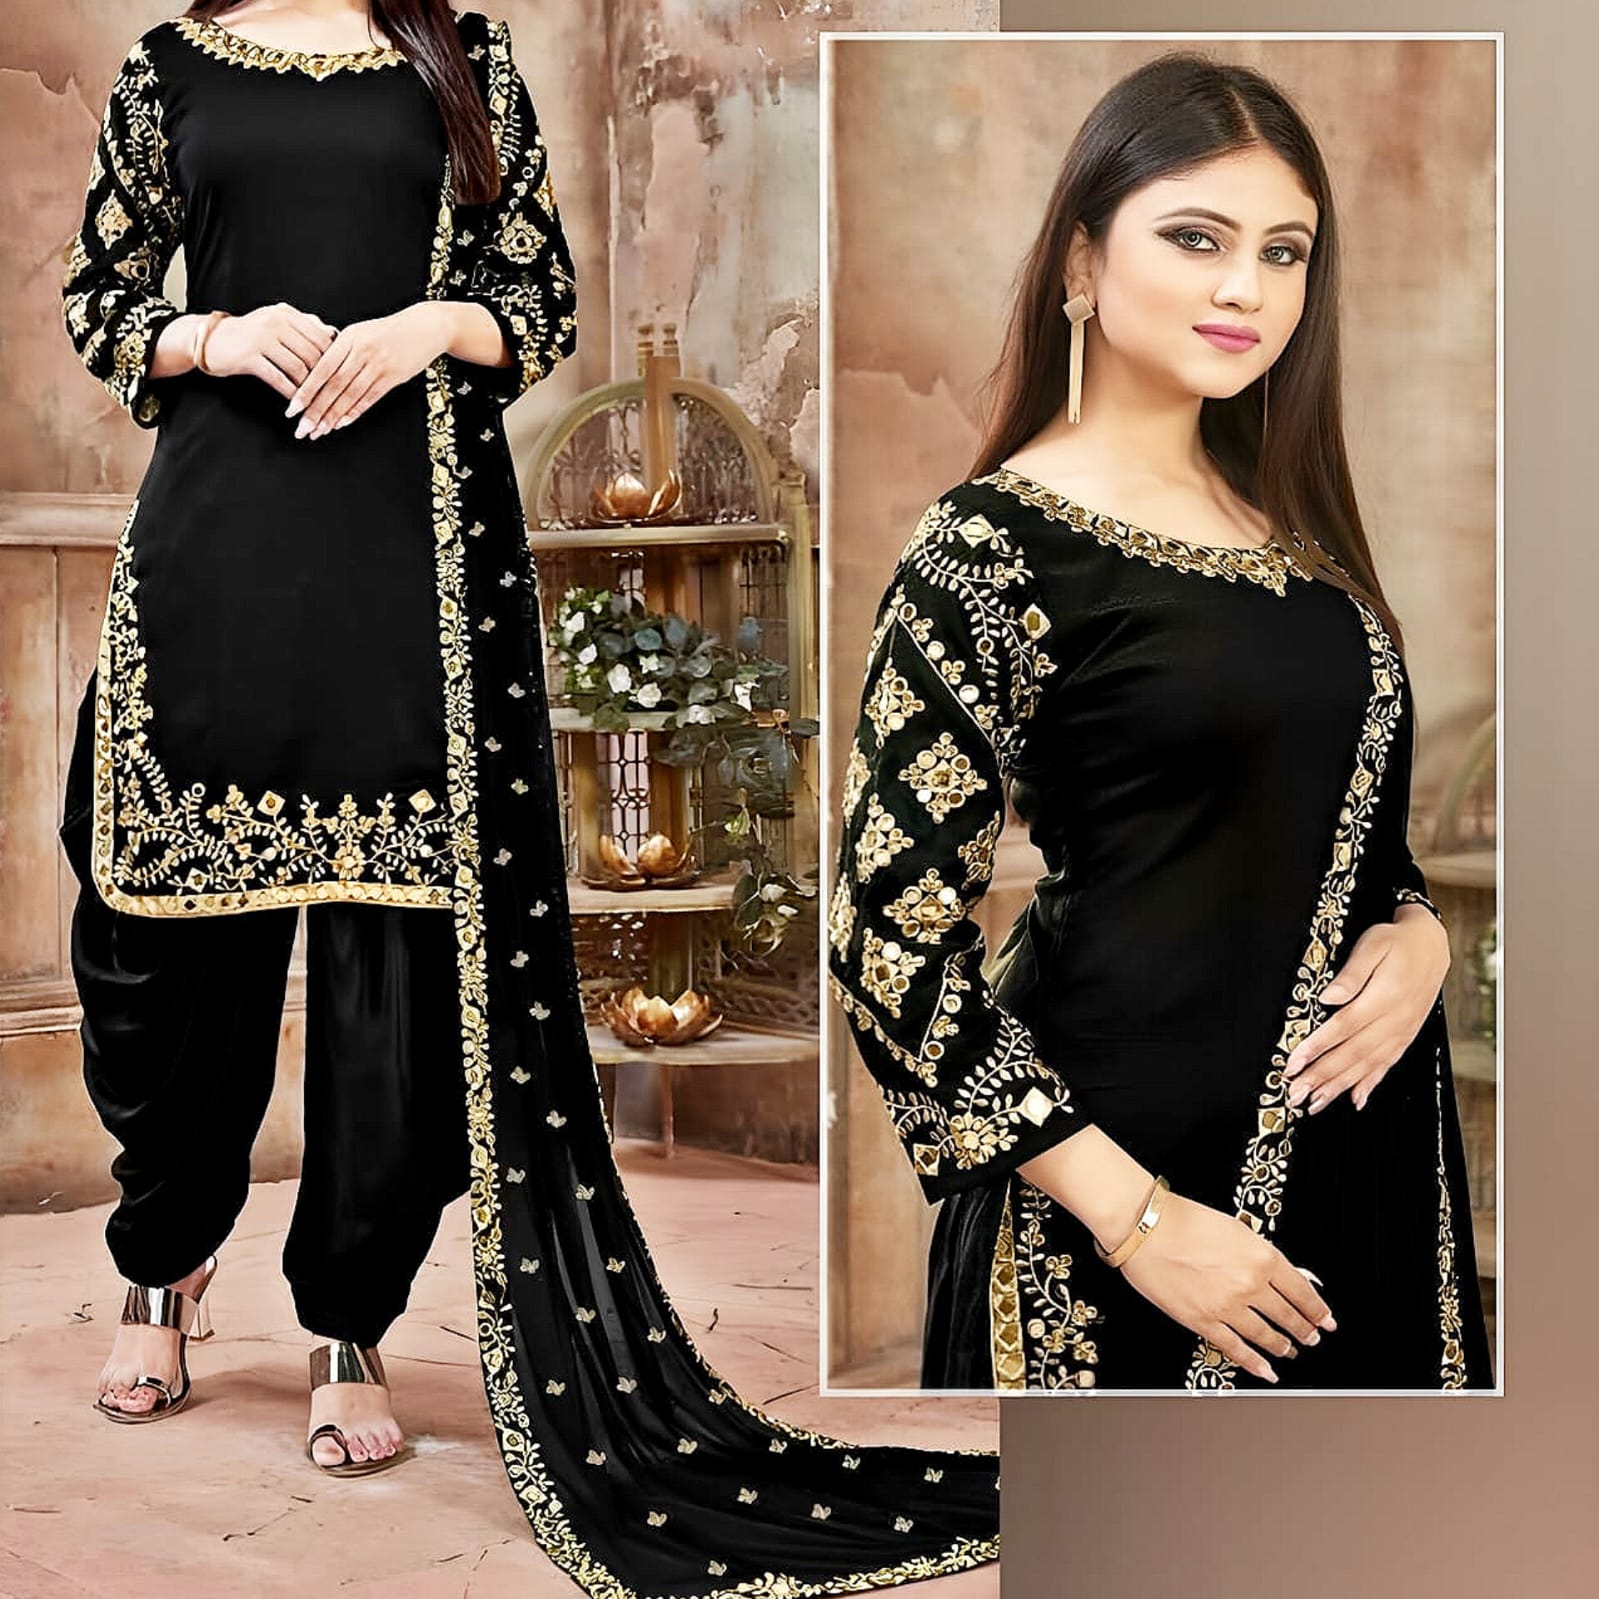 Stylish Plain Top Shirt And Printed Trouser For Ladies Price in Pakistan -  View Latest Collection of Shalwar Kameez